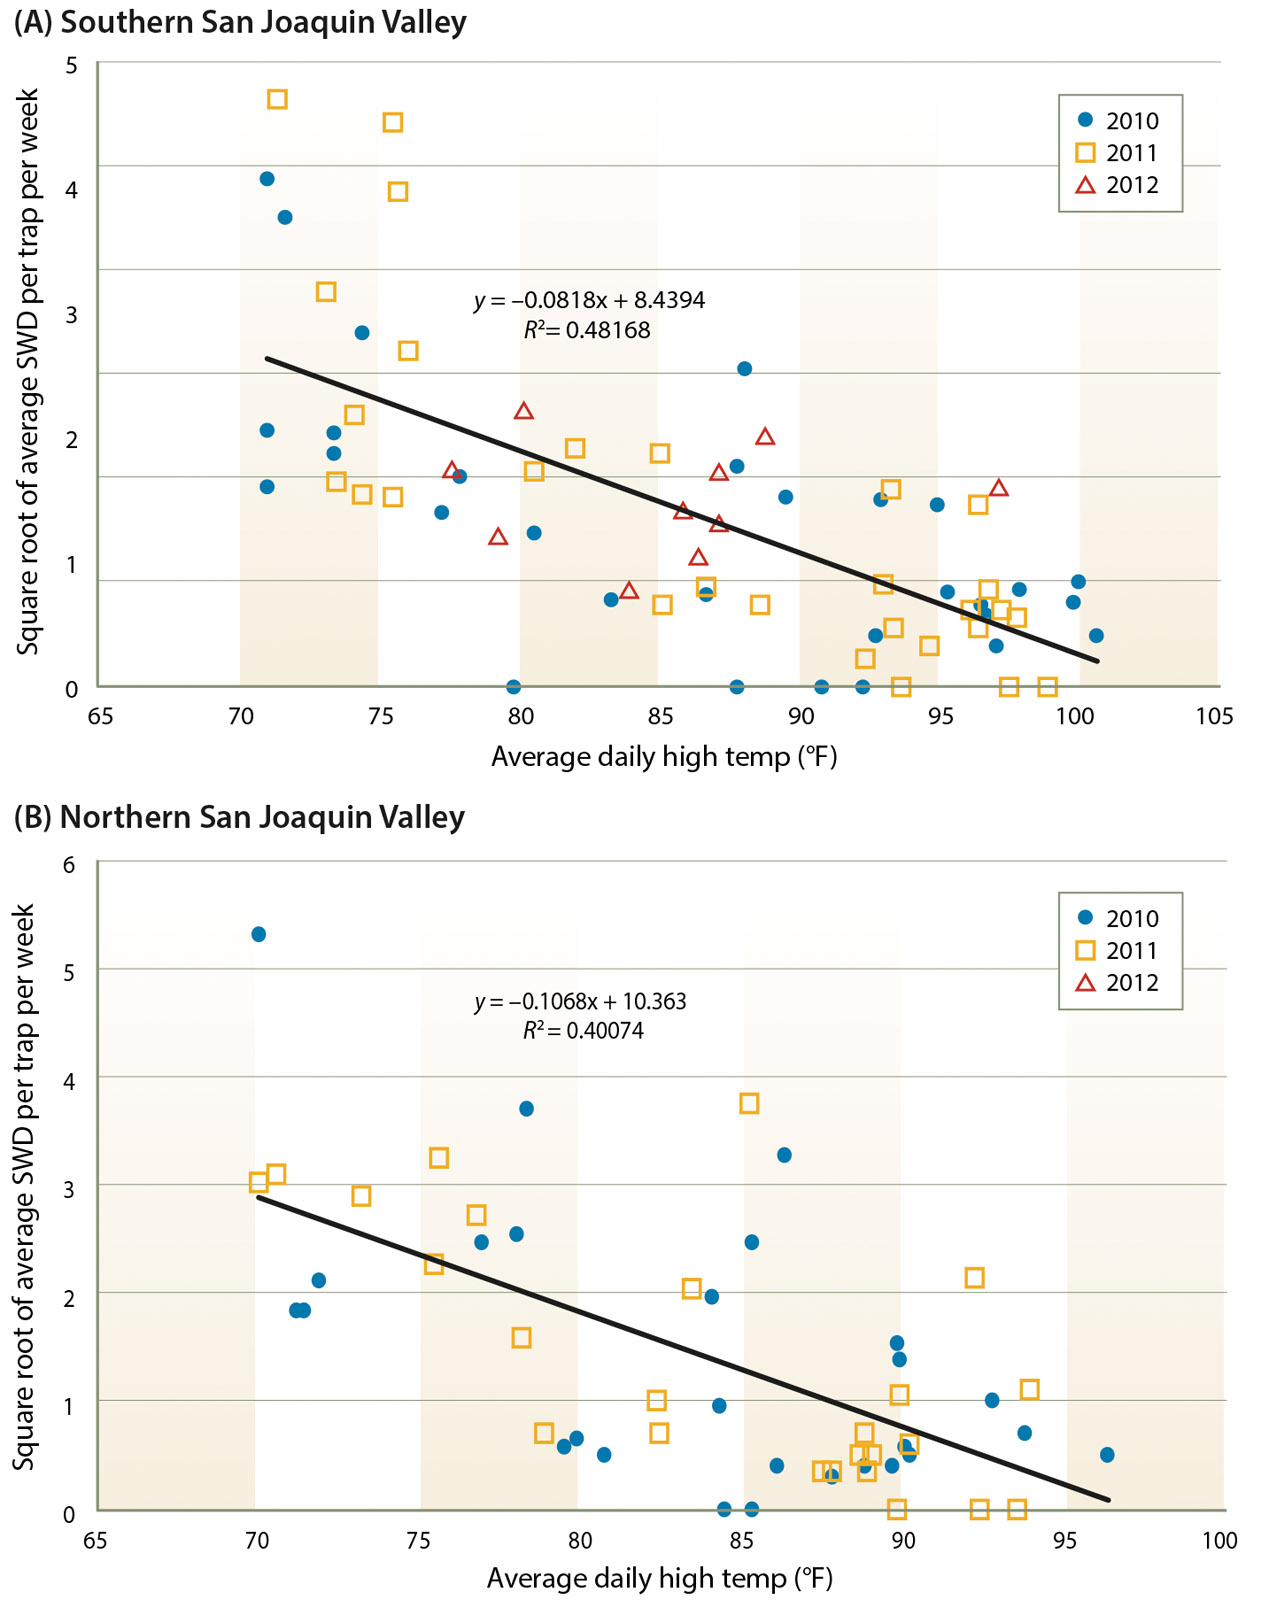 Regression analysis of the effects of high ambient temperatures on captures of adult SWD in (A) the southern San Joaquin Valley (y = ?0.0818x + 8.4394, R2 = 0.4817) and (B) the northern San Joaquin Valley (y = ?0.1068x + 10.363, R2 = 0.4007). Each point represents the average trap captures (square-root transformed to linearize data) over a period of 1 week compared with the average daily ambient high temperatures during those same weeks from 2010 to 2012.